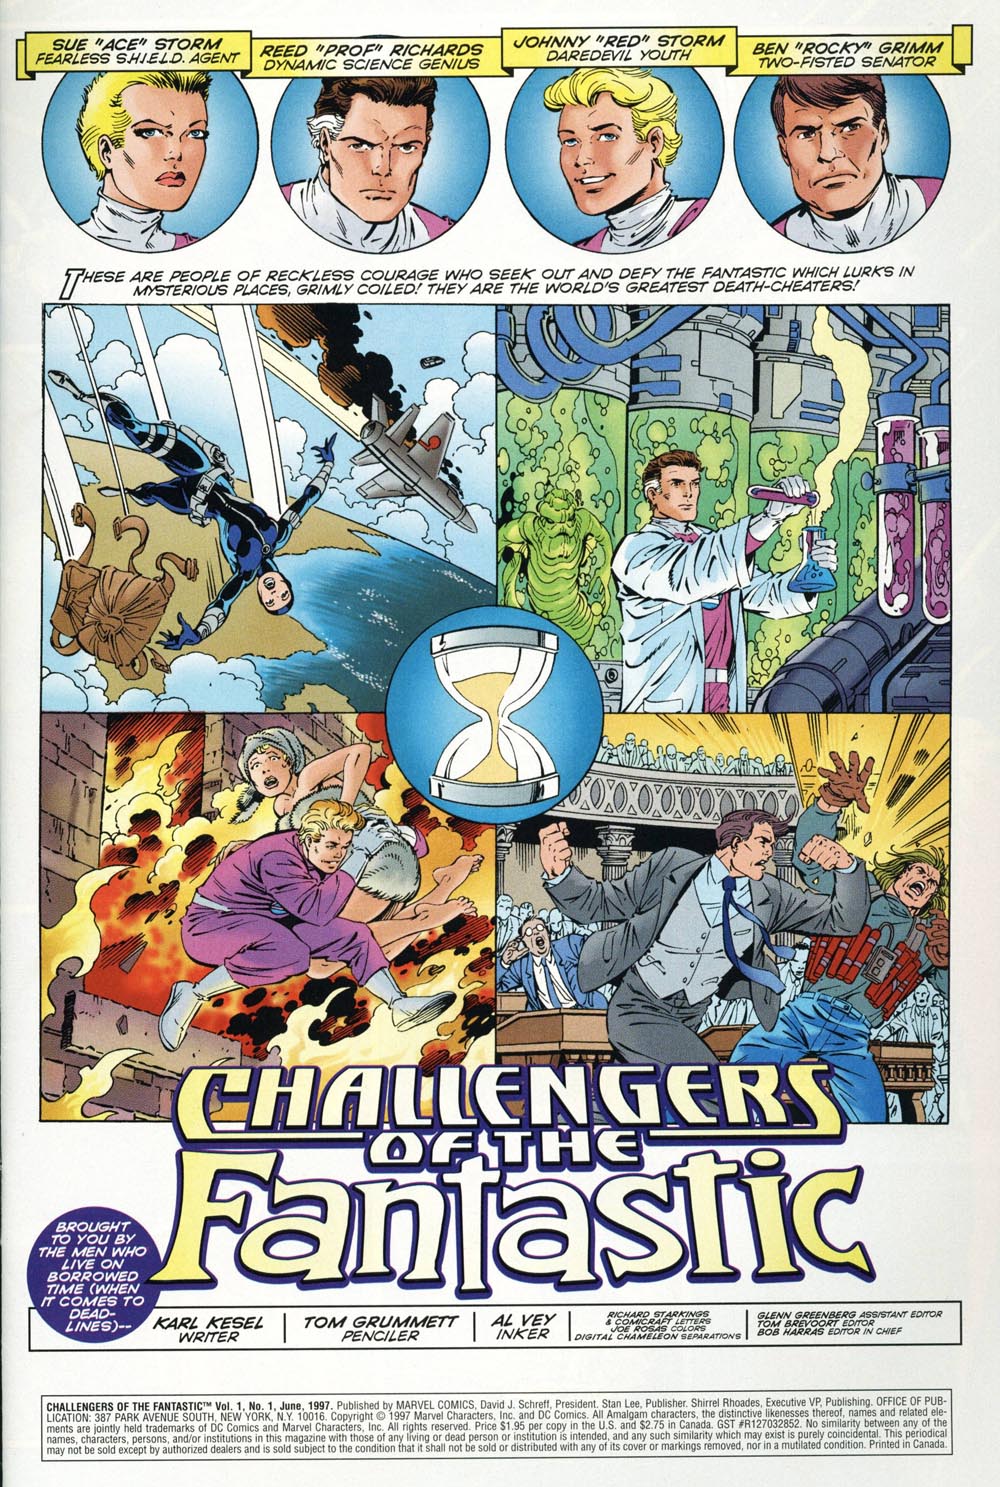 Read online Challengers of the Fantastic comic -  Issue # Full - 2